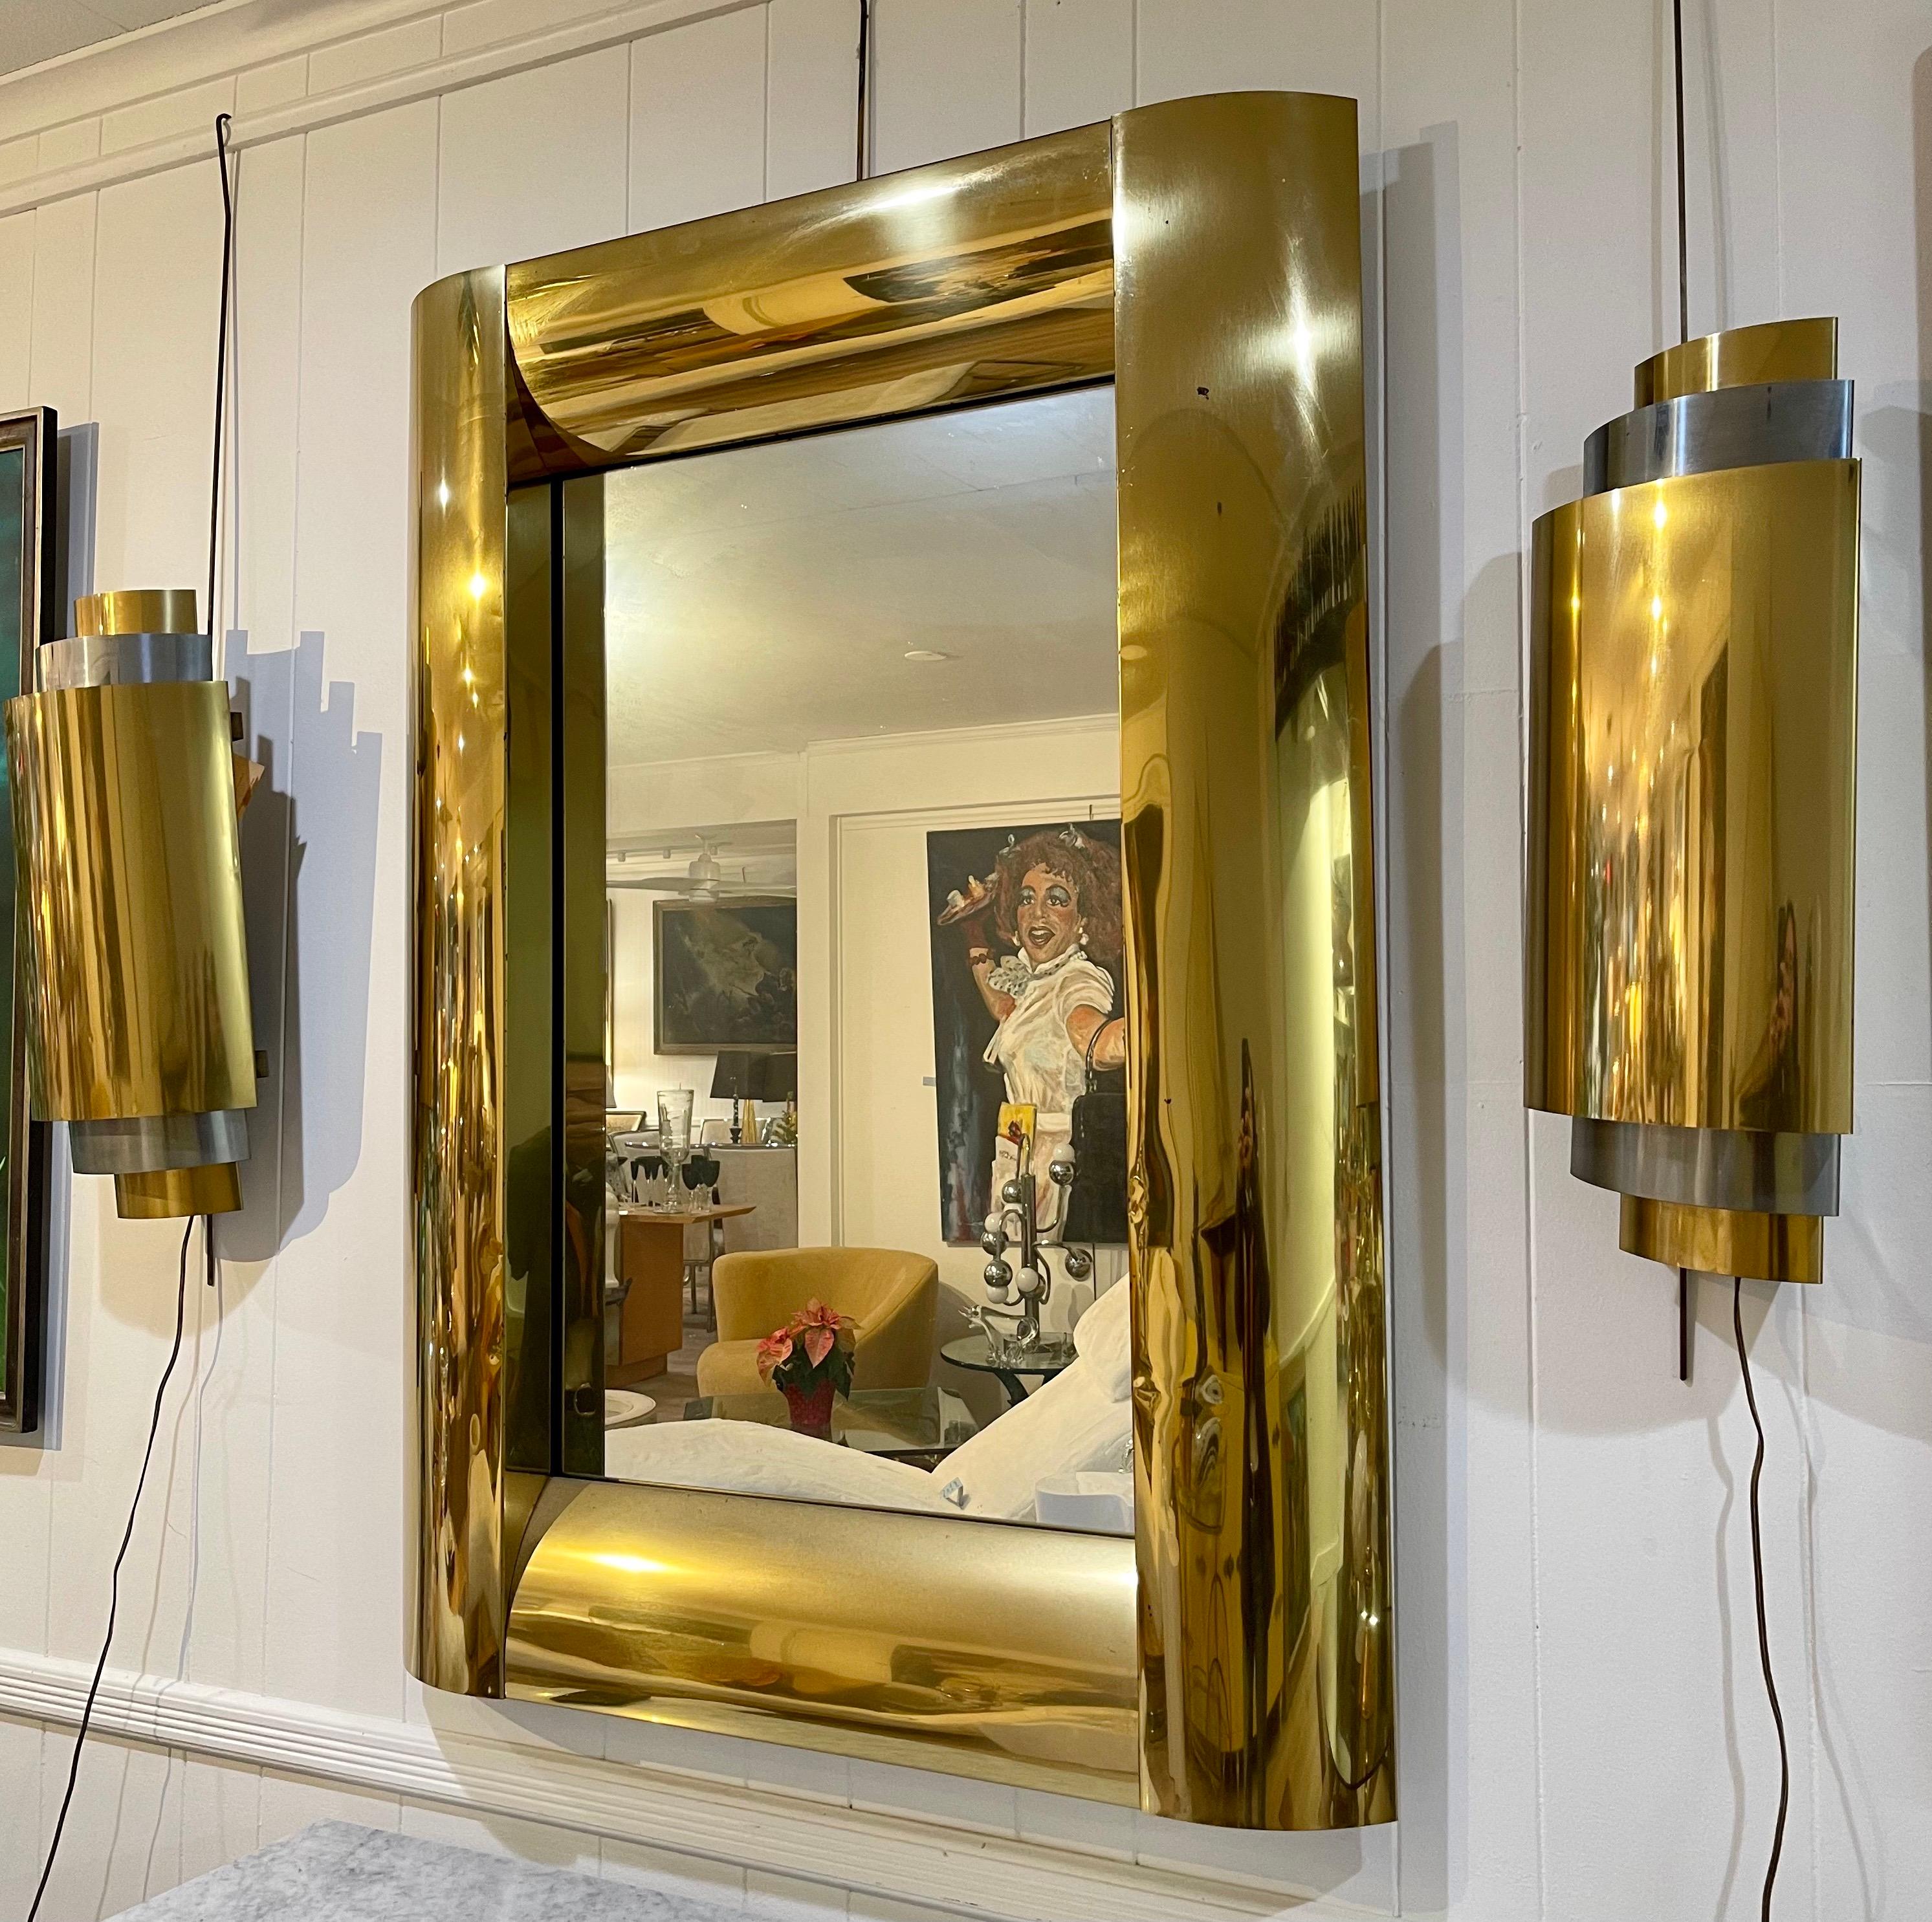 A coveted set of wall sconces and wall mirror design in the 1980s by Curtis Jere. The wall sconces were designed in tandem with the mirror by Curtis Jere. The mirror dimensions are below and the sconces, which are electrified measure 7 by 22 inches